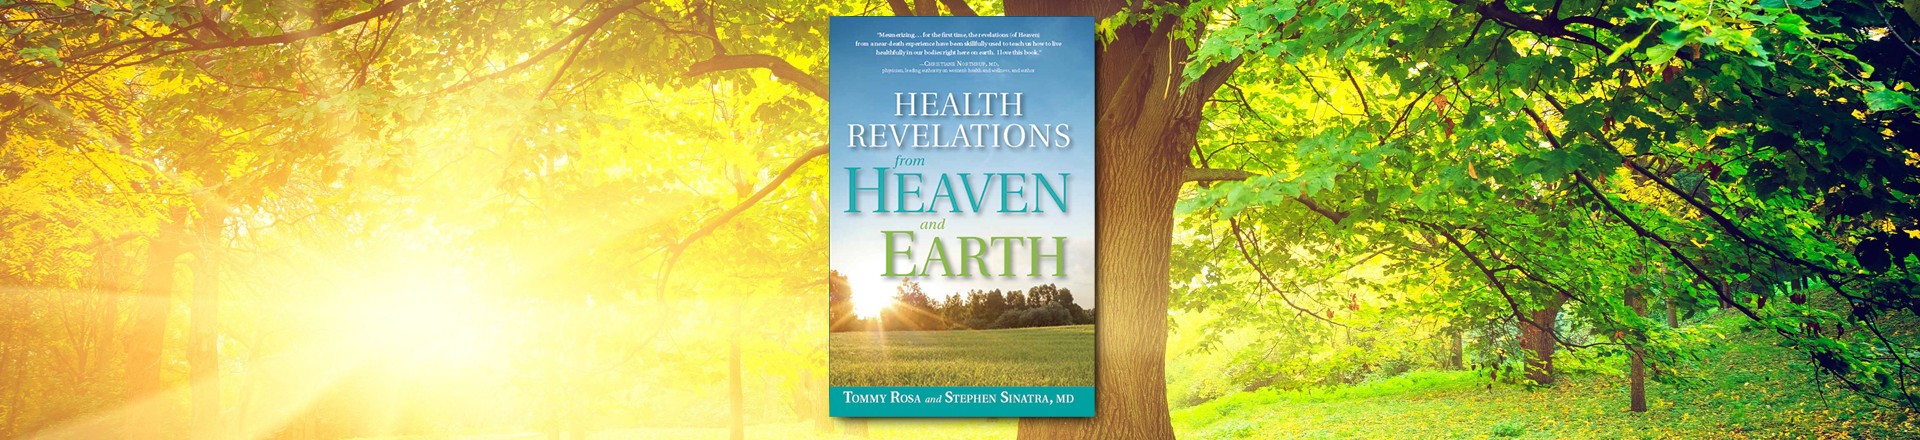 Tommy Rosa, co-author of Health Revelations from Heaven and Earth, provides health and wellness information during this free online summit hosted by Hay House in 2016